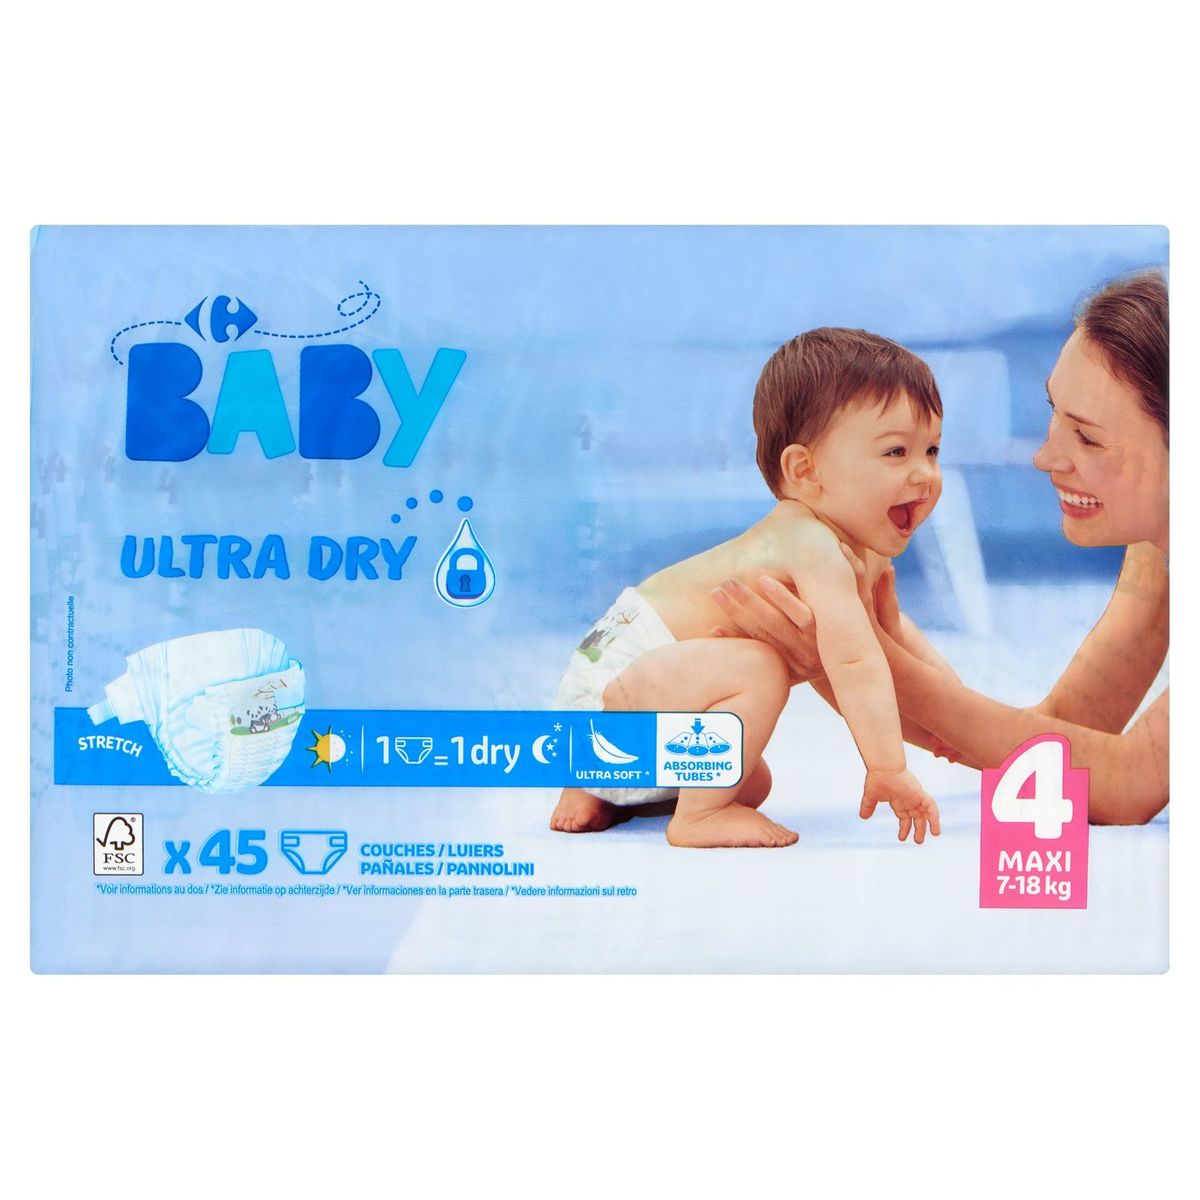 Carrefour Baby Ultra Dry 4 Maxi 7-18 kg 45 Luiers